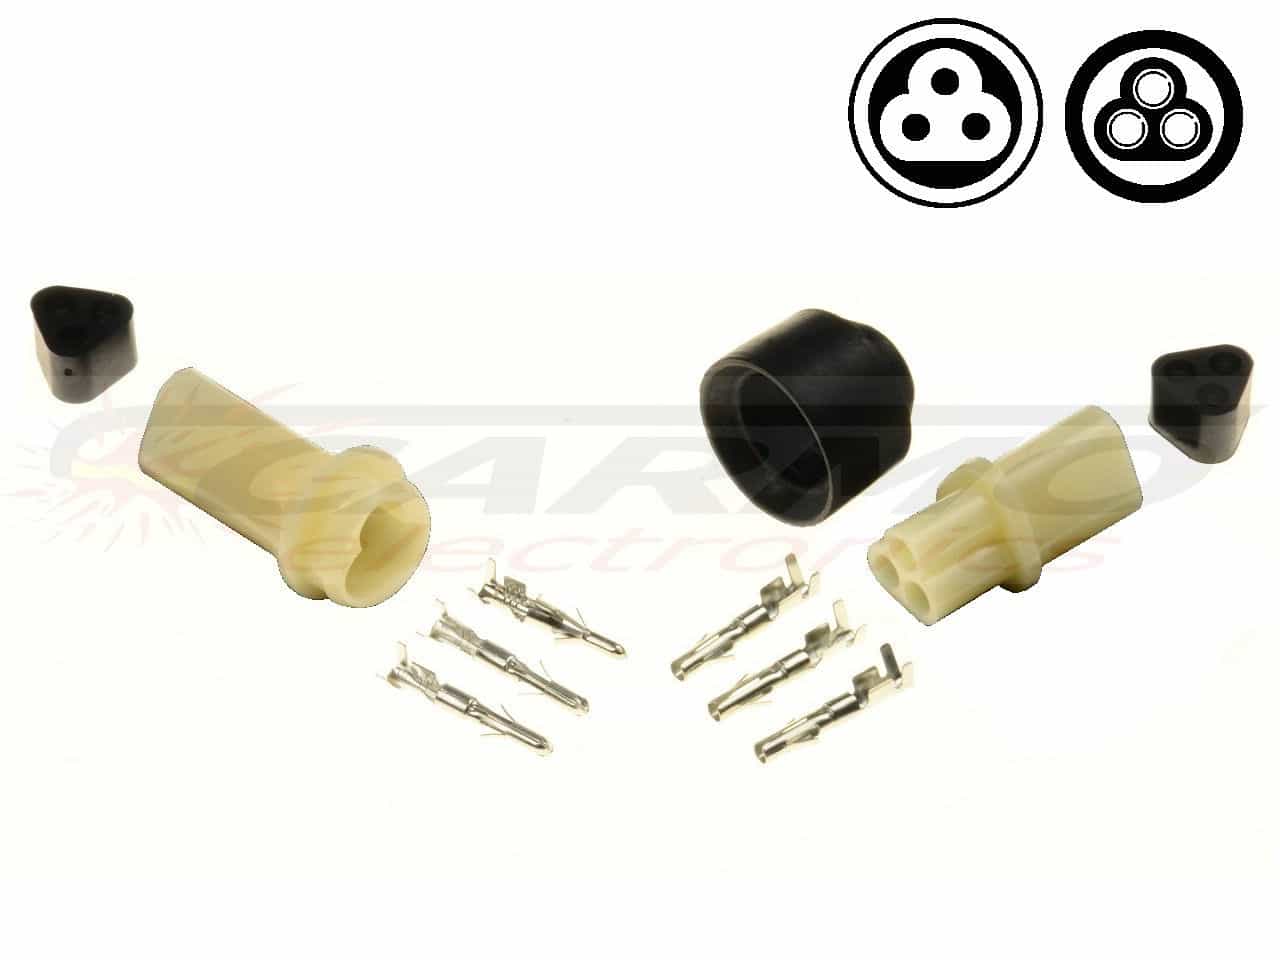 3 pin YPC Sealed connector set - off road bike connector - Click Image to Close